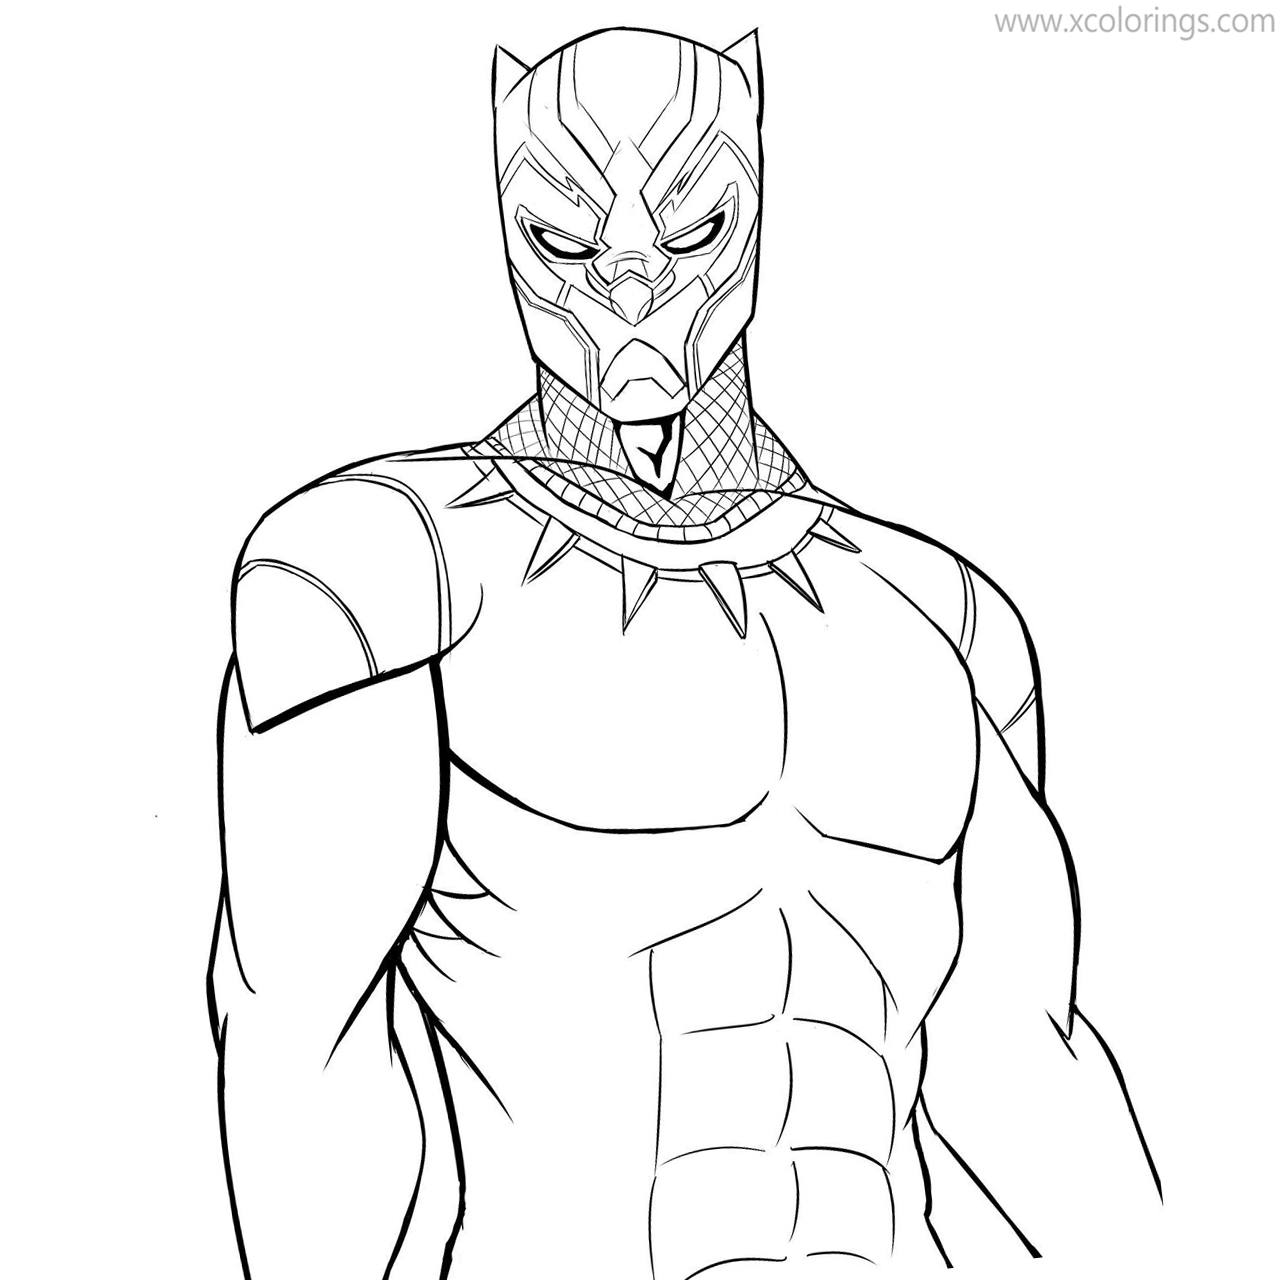 Free Avengers Superhero Black Panther Coloring Pages printable